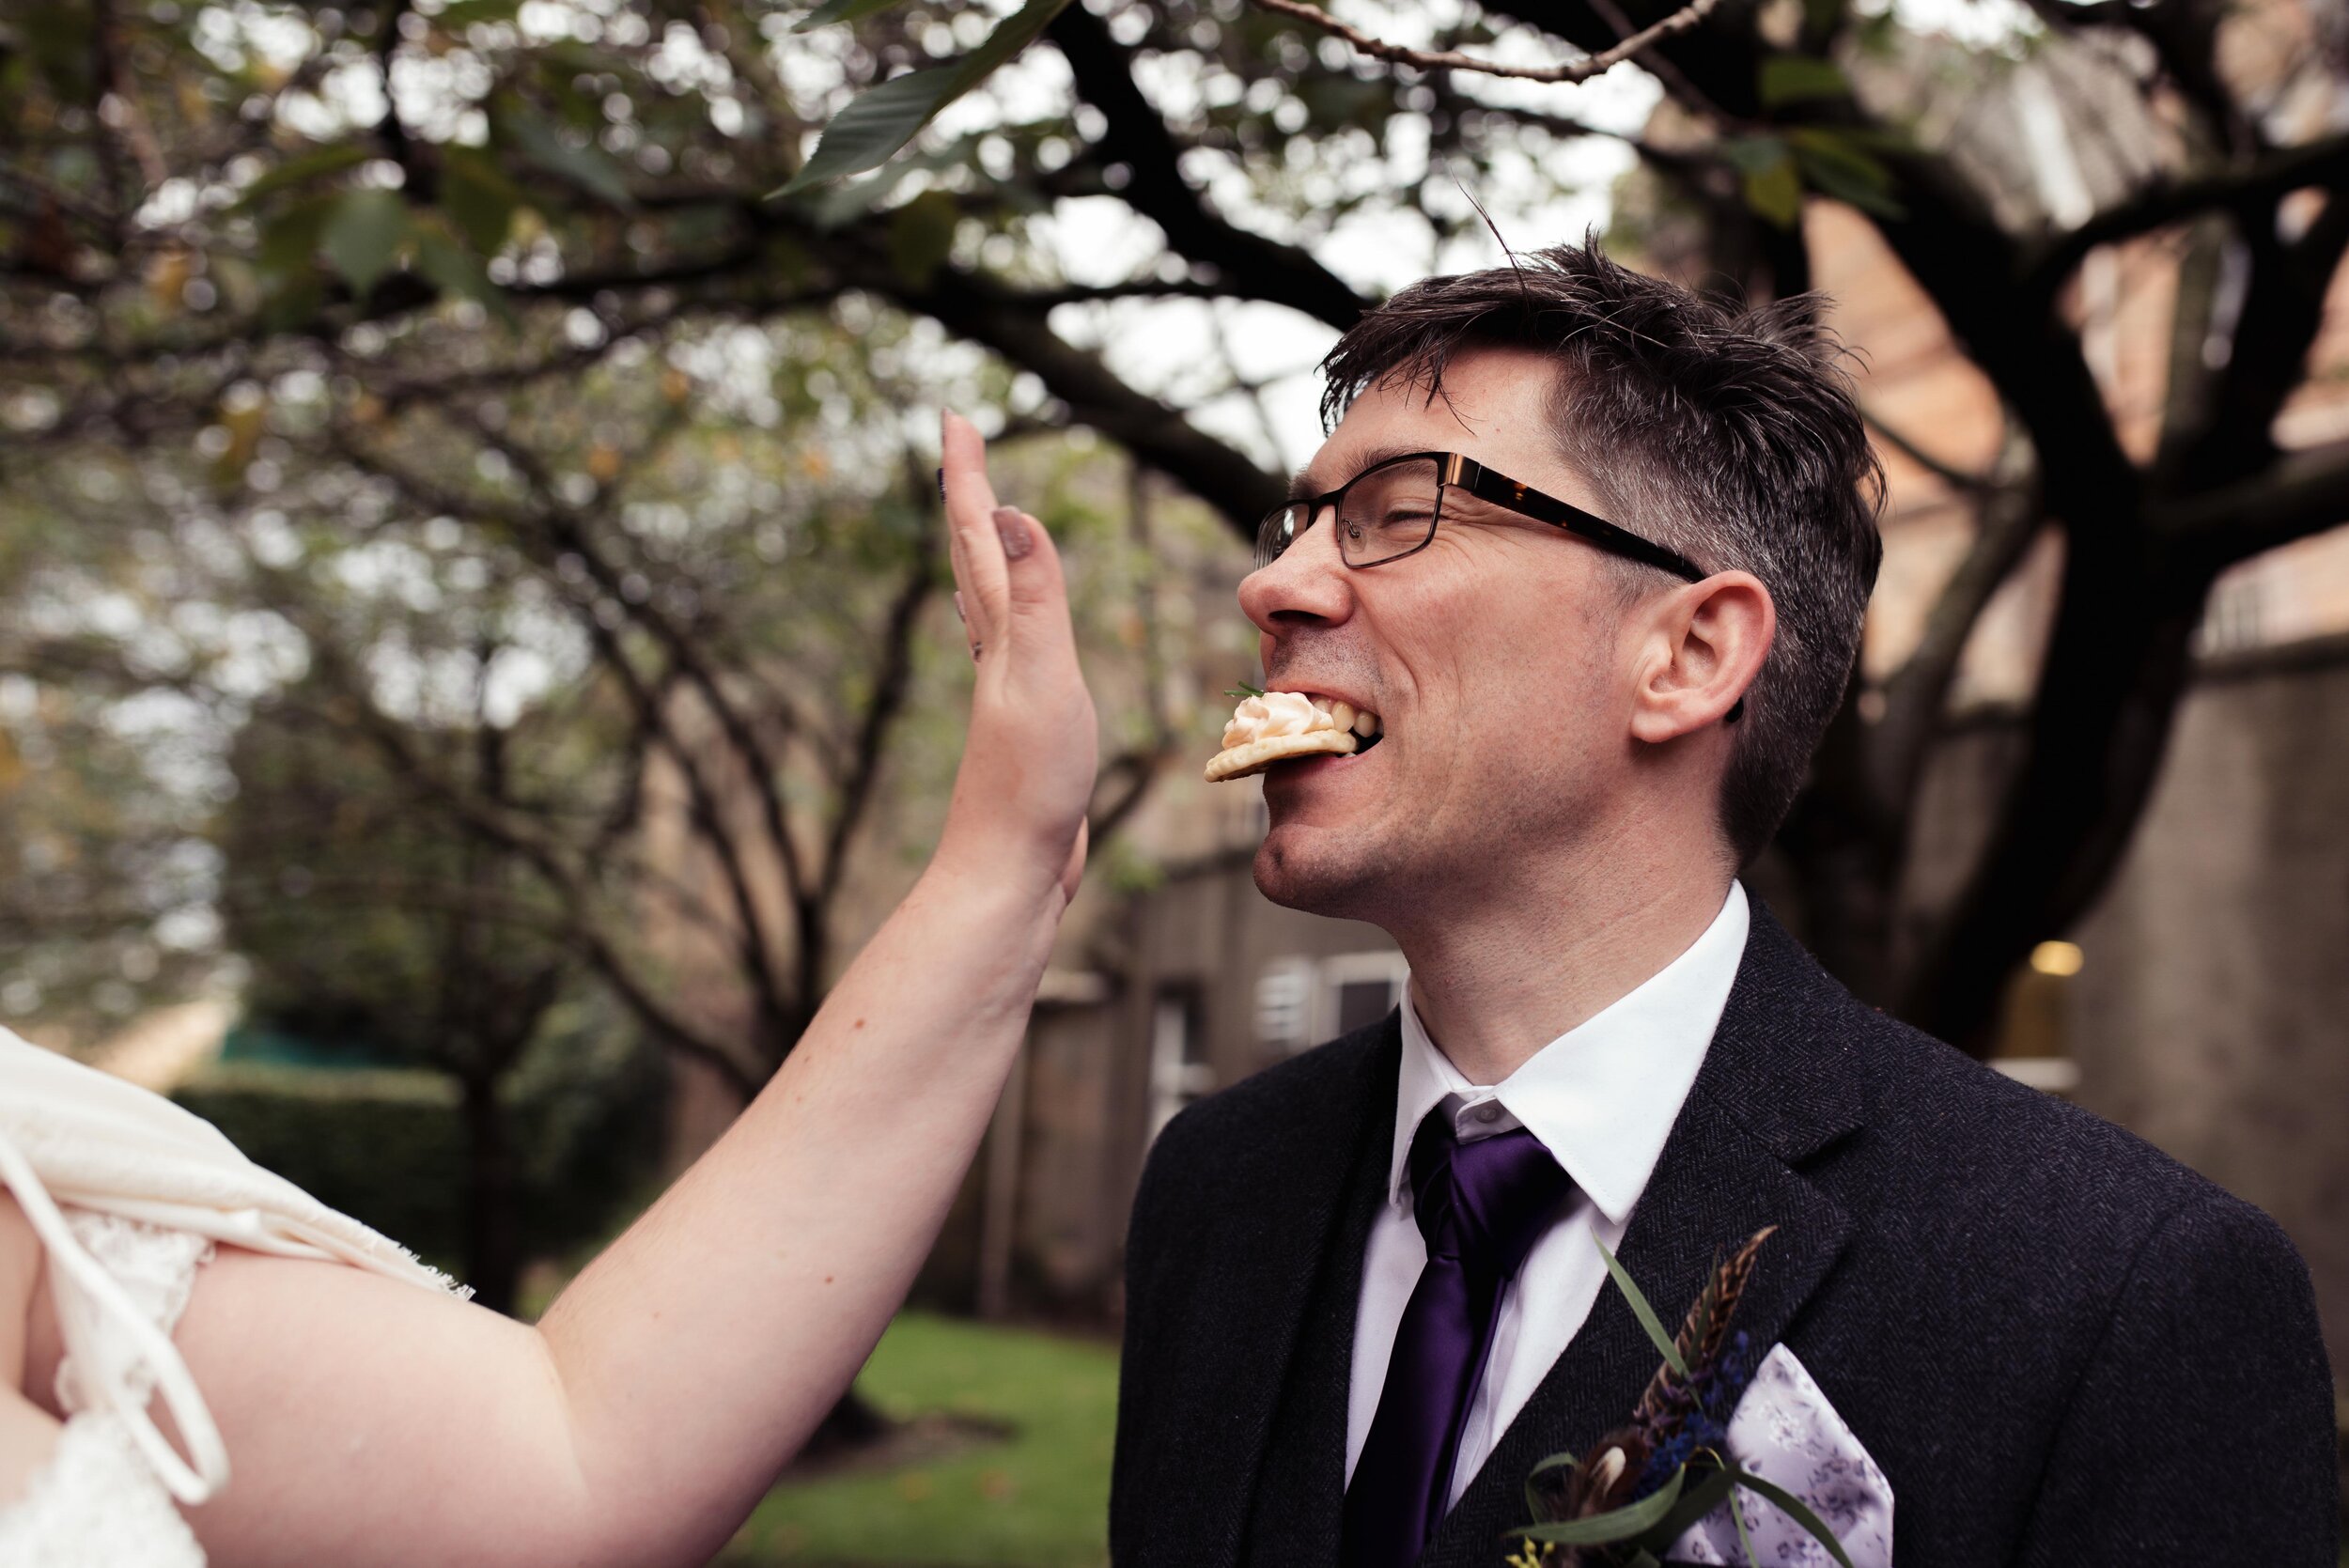 Bride shoving a canapes in the grooms mouth